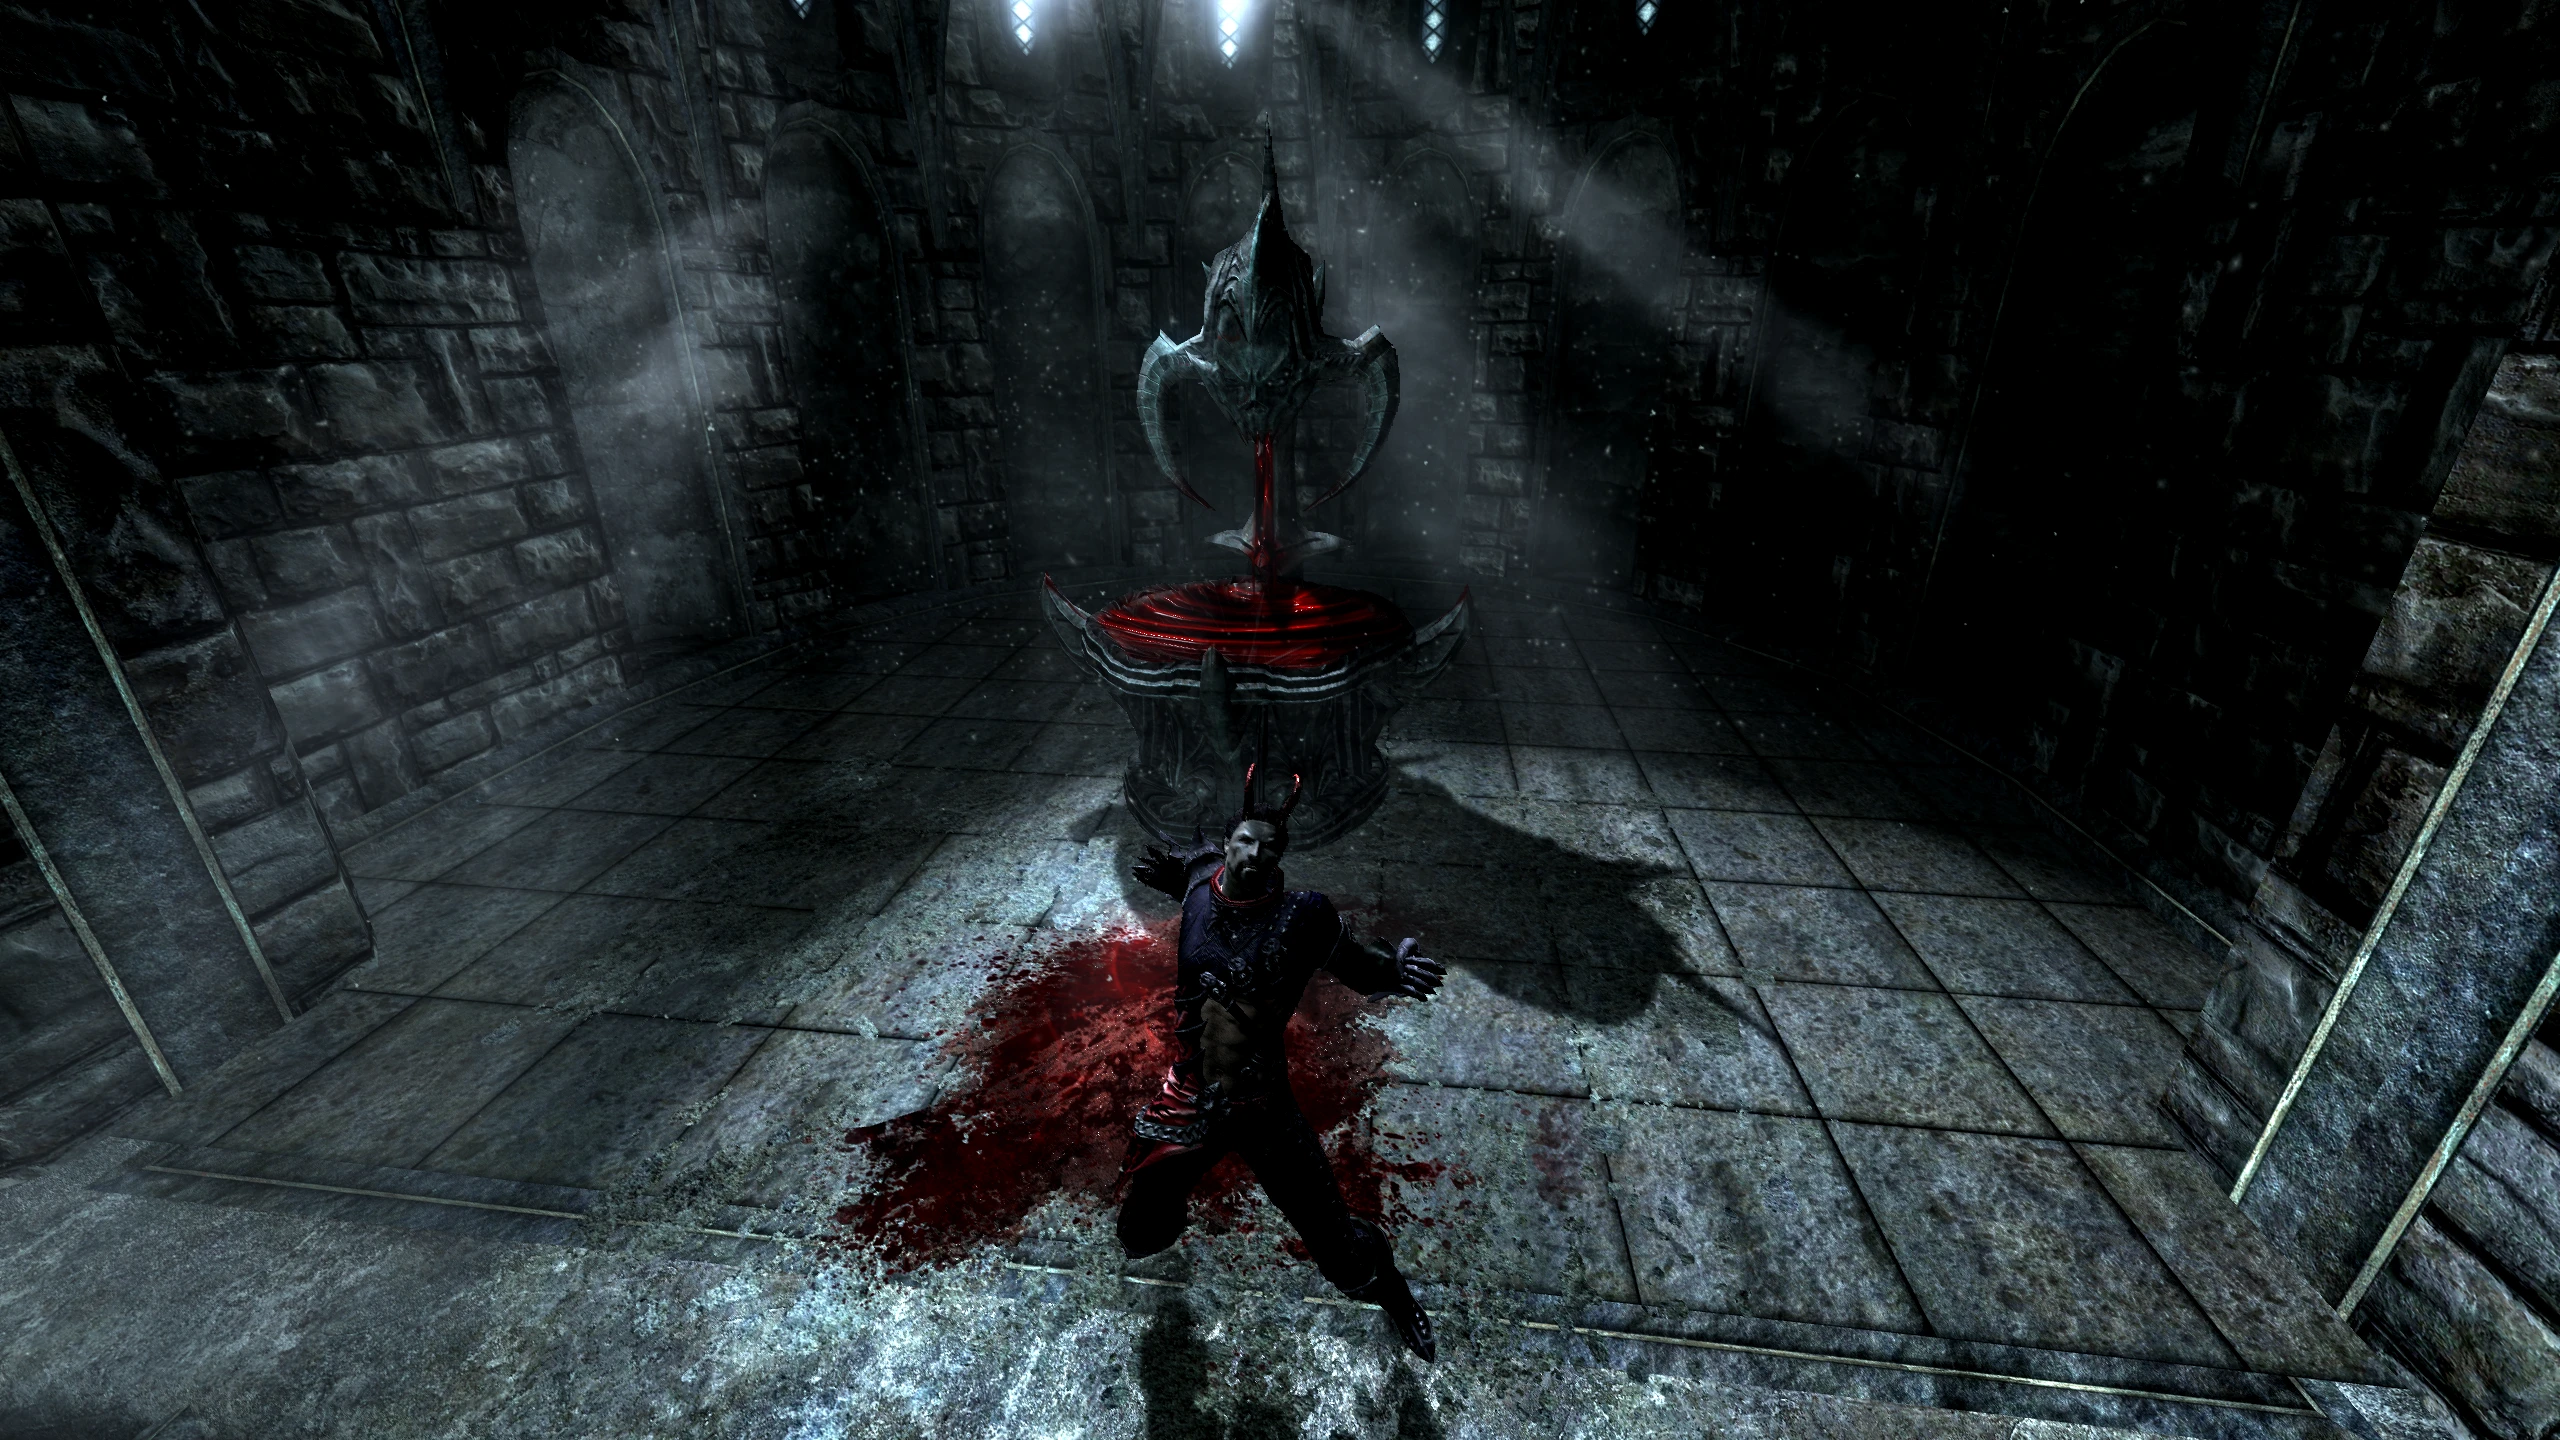 vampire lord appearance mod